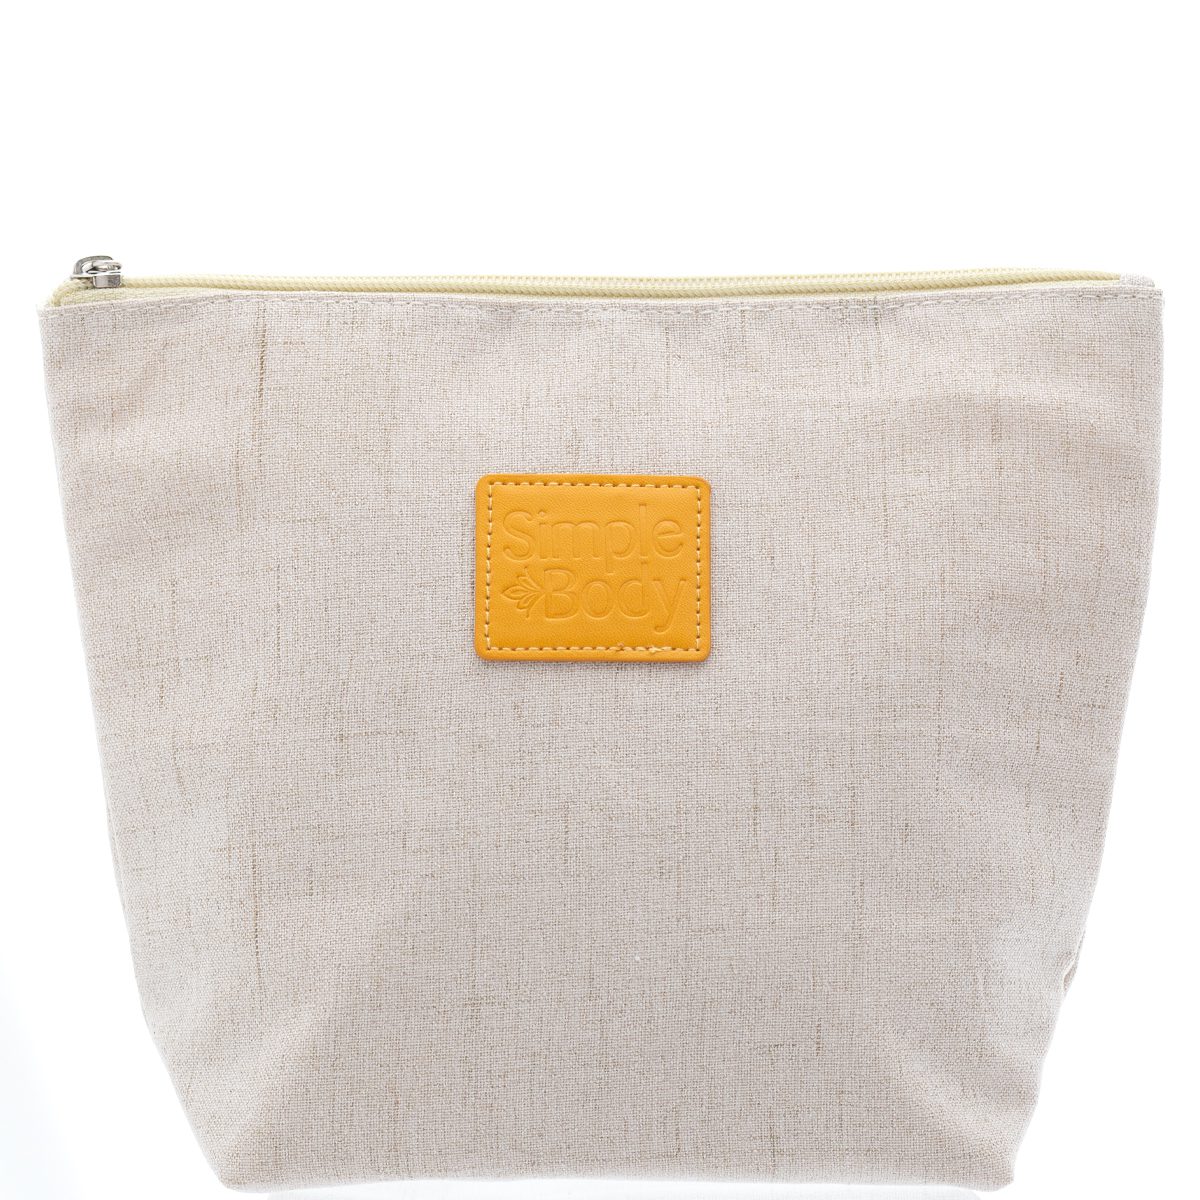 Fully-Lined Linen Cosmetic Bag in Beige